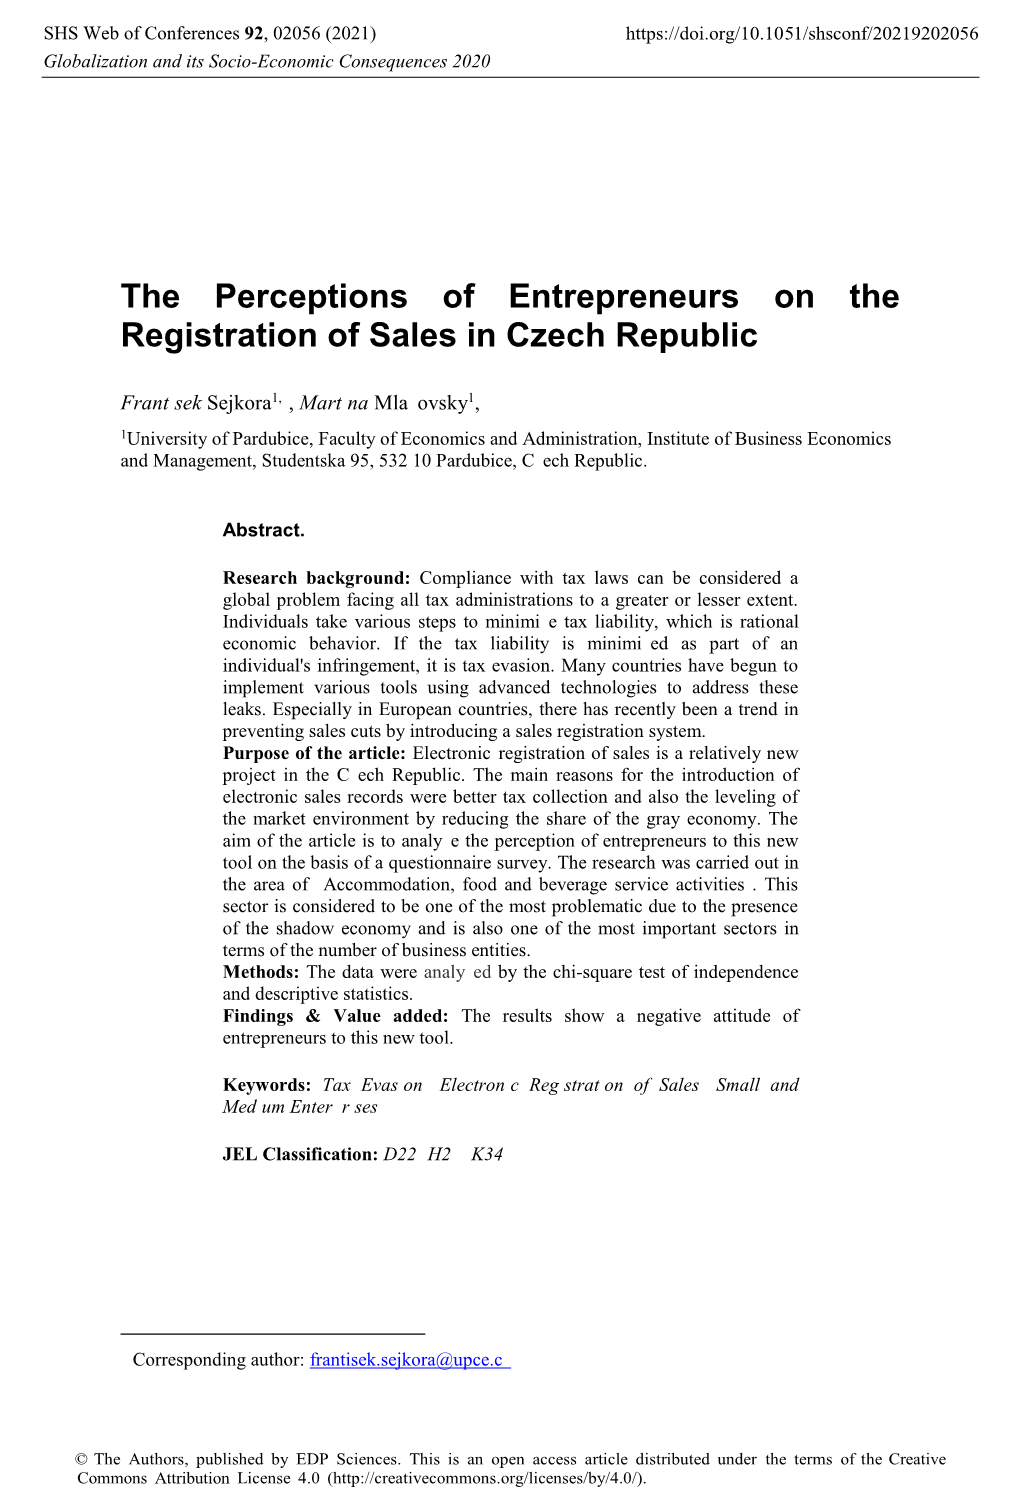 The Perceptions of Entrepreneurs on the Registration of Sales in Czech Republic